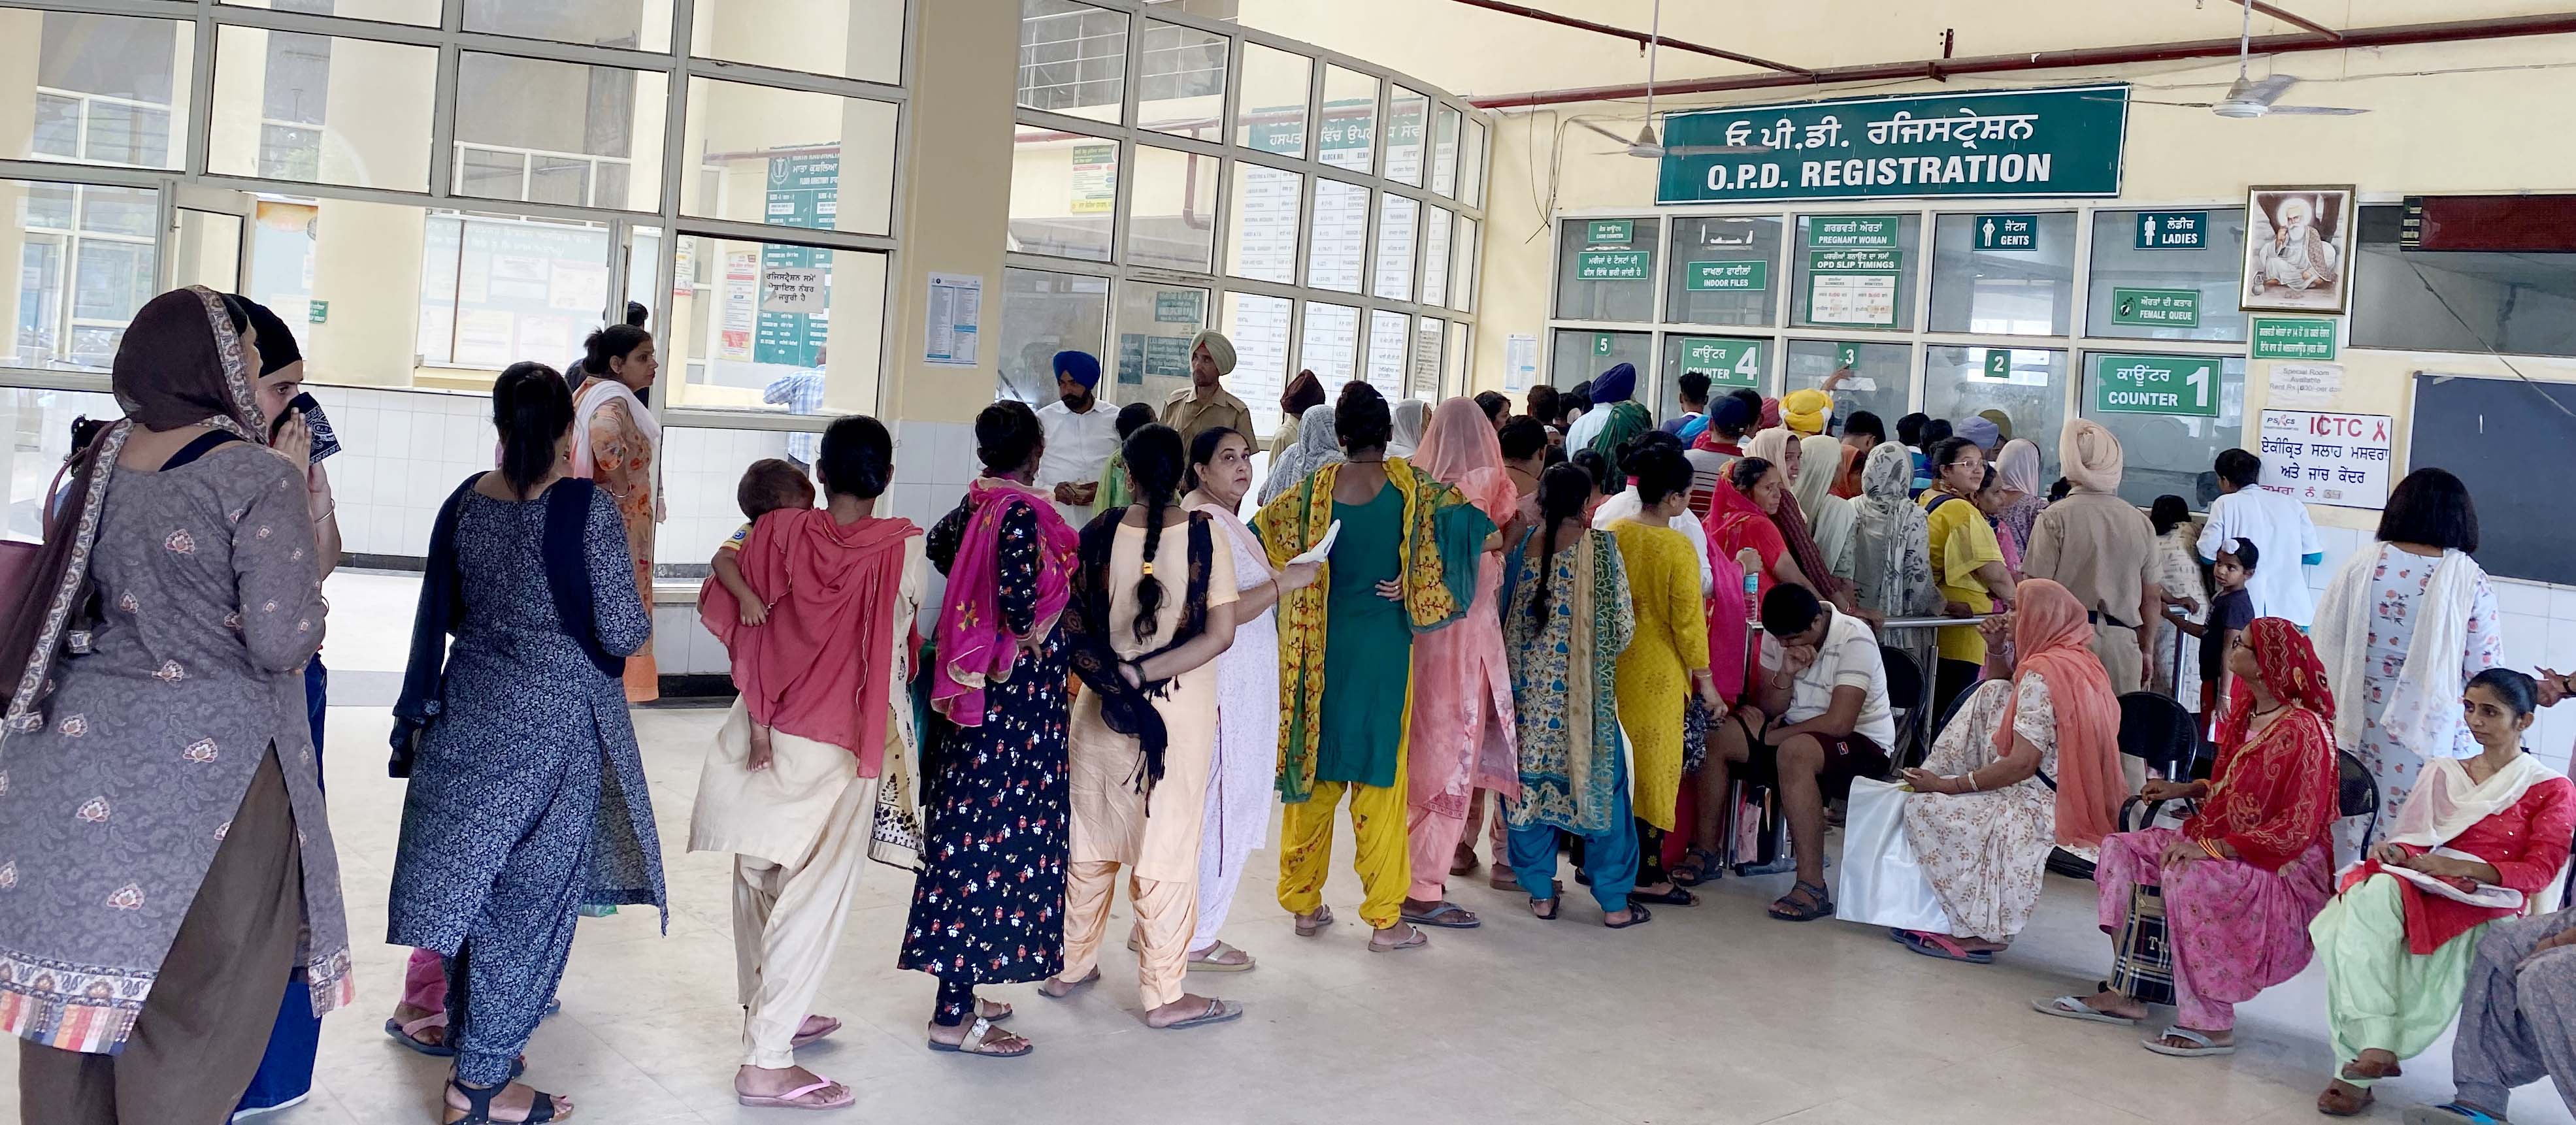 Long queues of patients at govt hospital commonplace